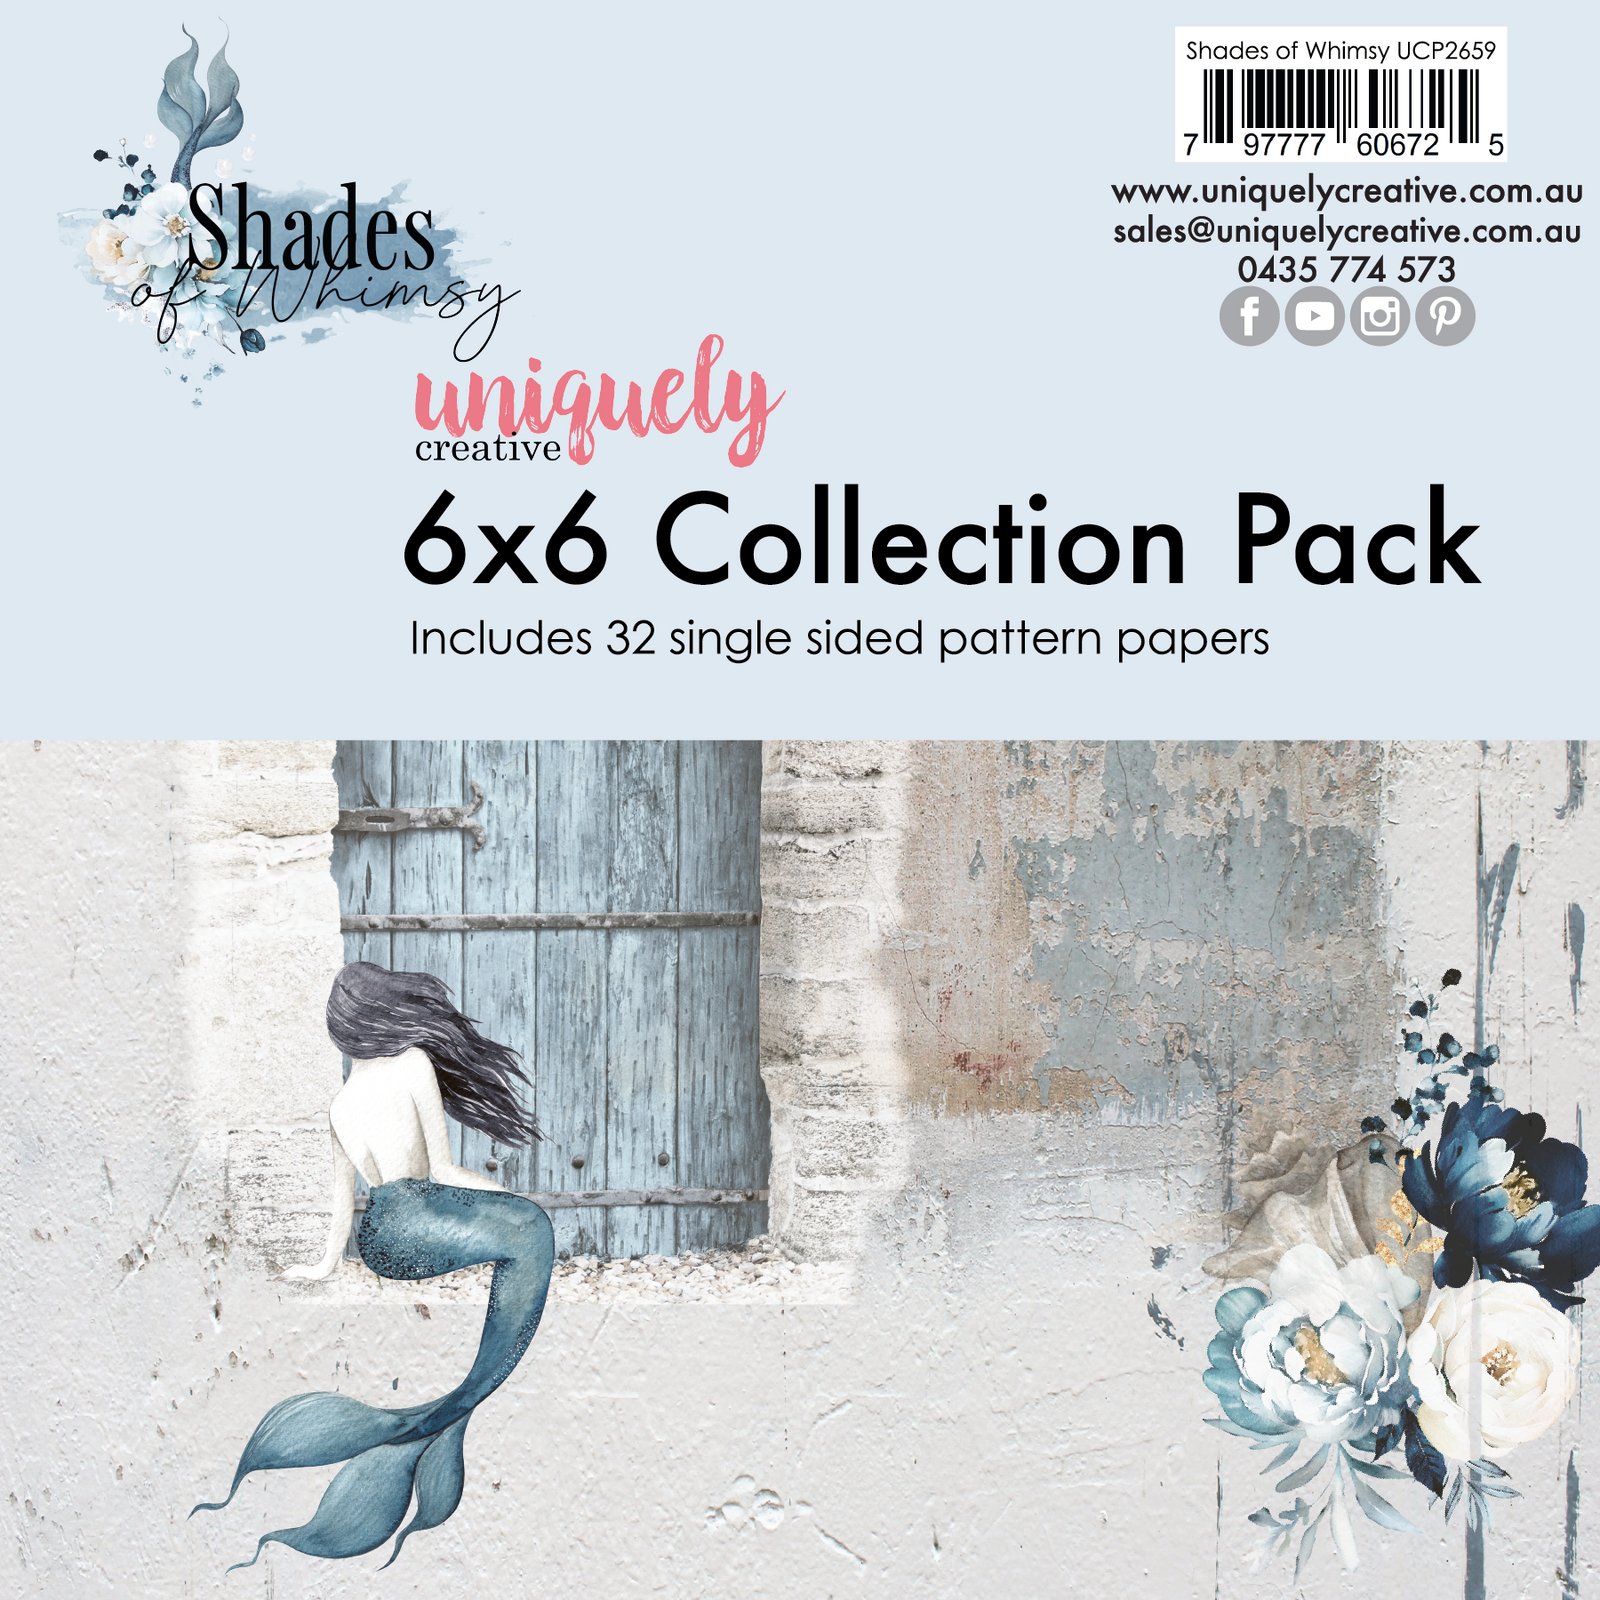 Uniquely Creative 6x6 Cardstock 210gsm Shades of Whimsy